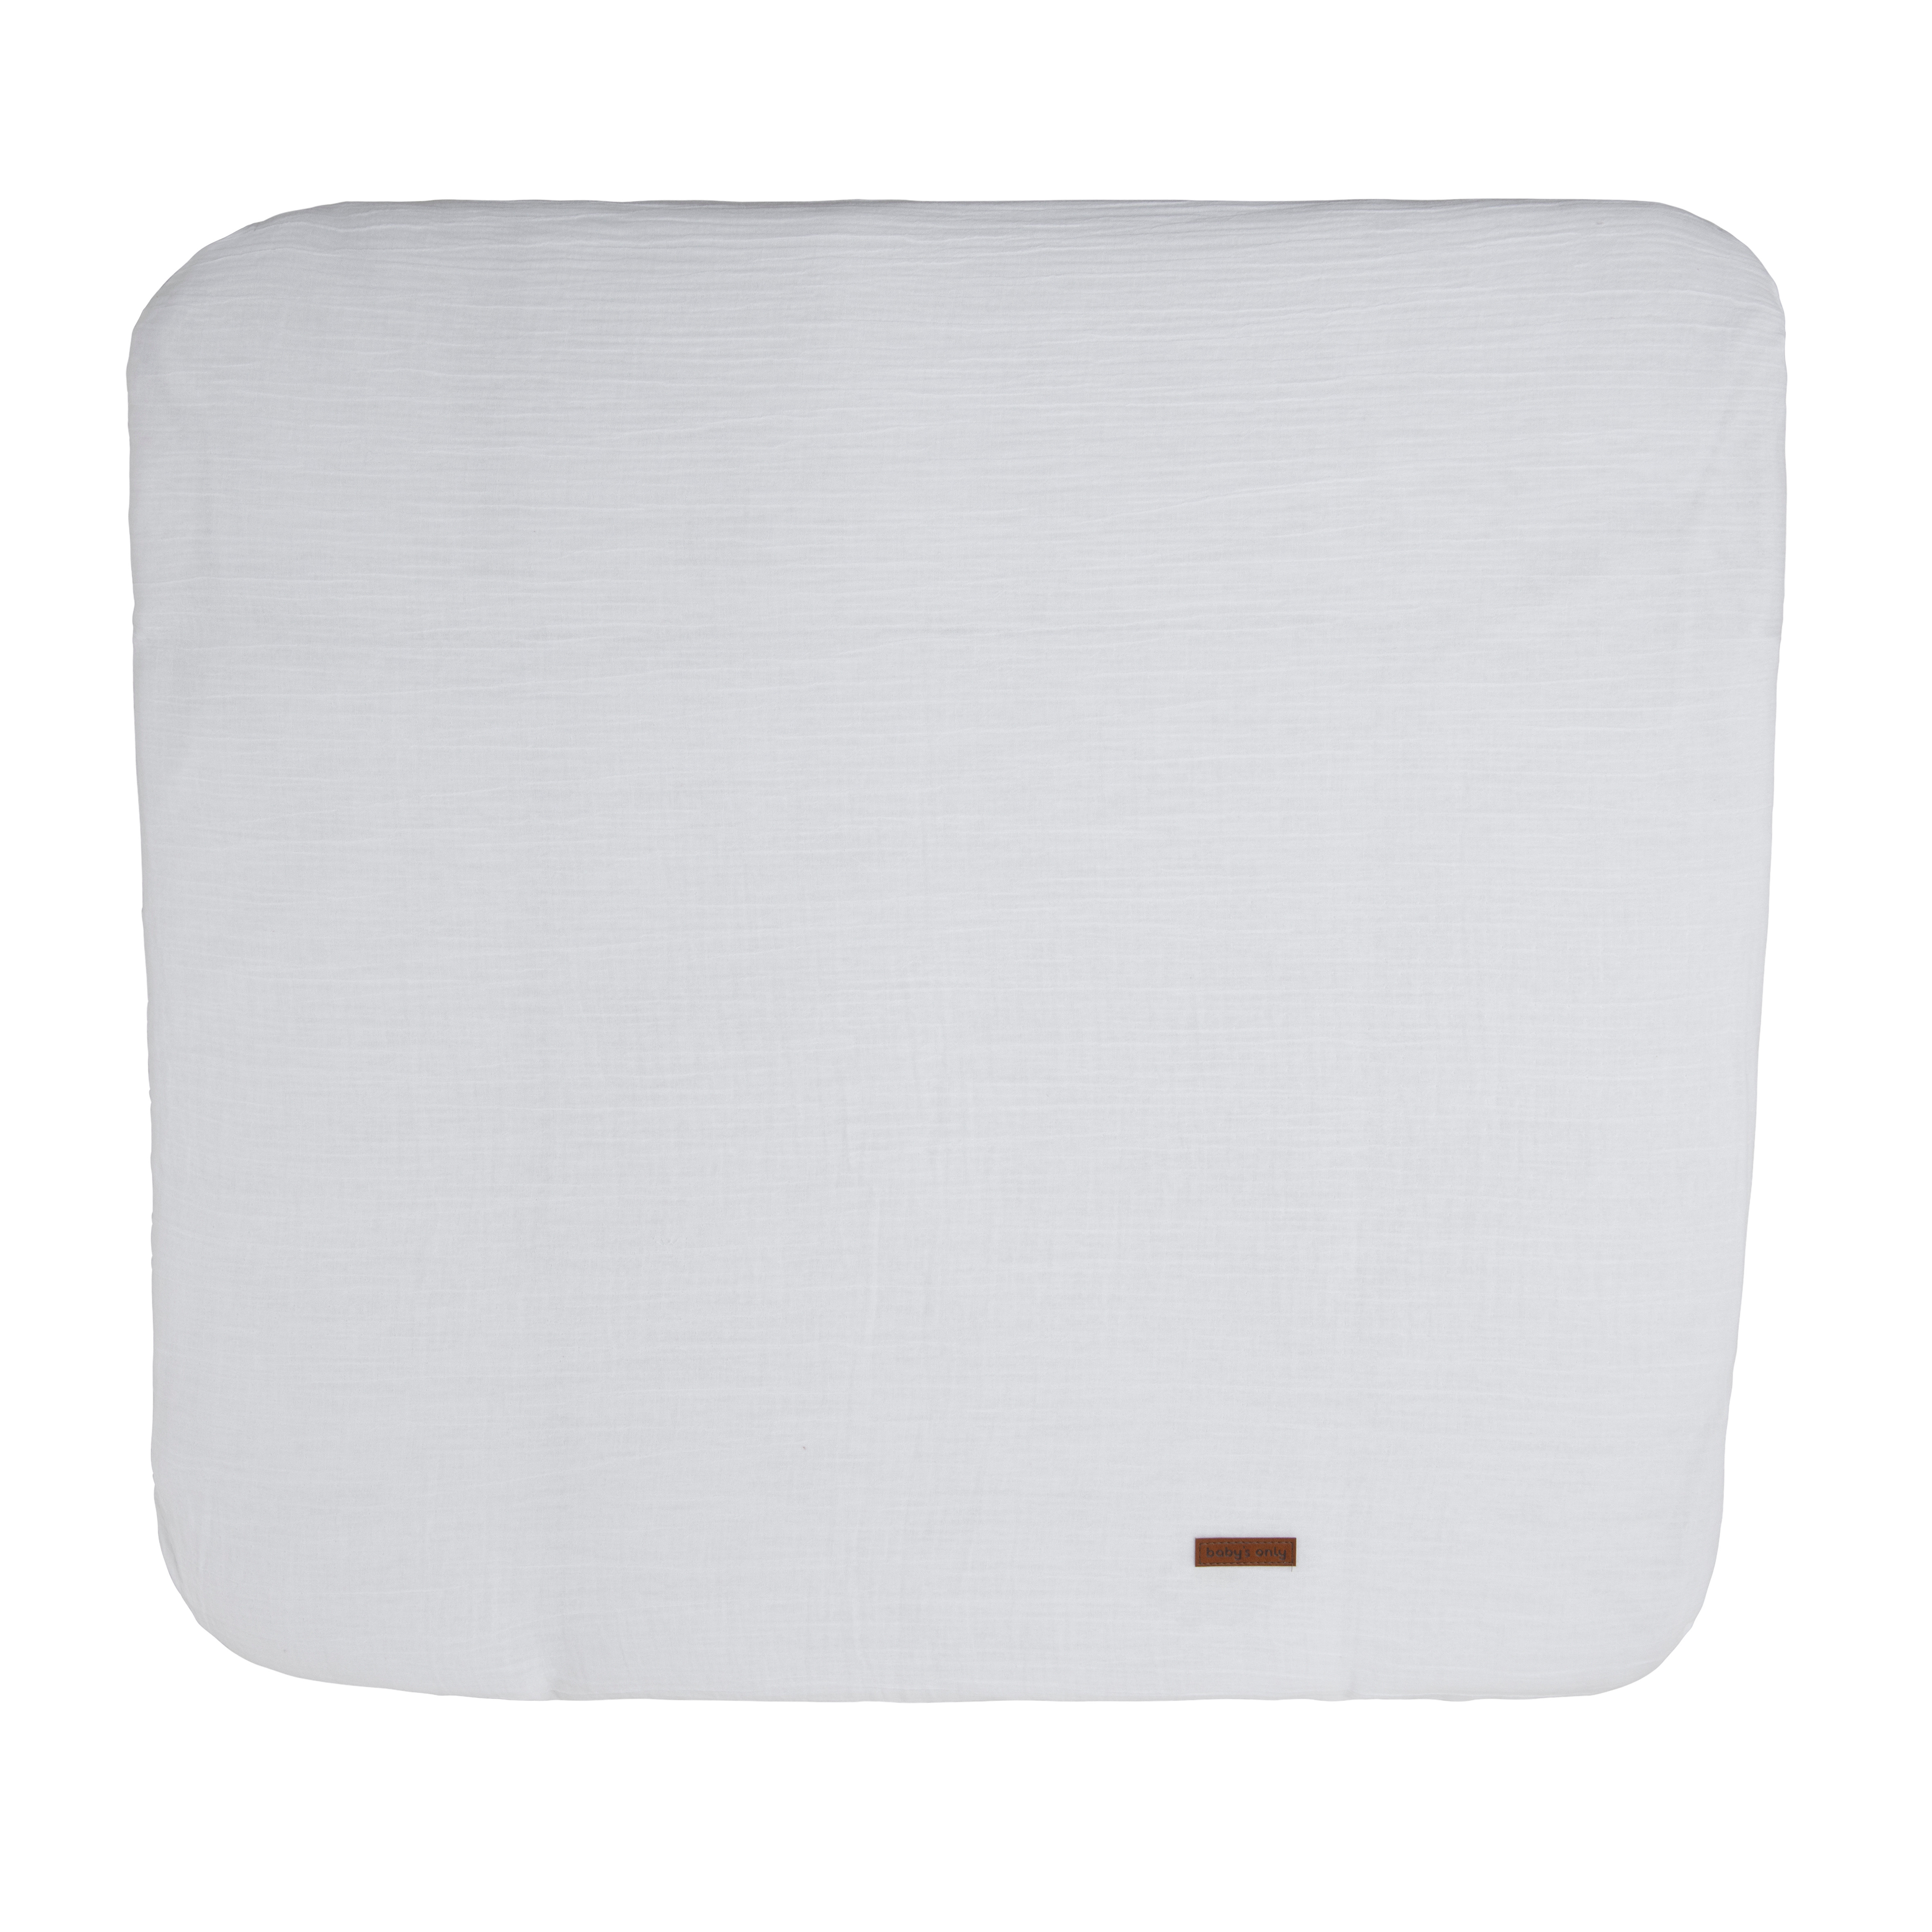 Changing pad cover Breeze white - 75x85